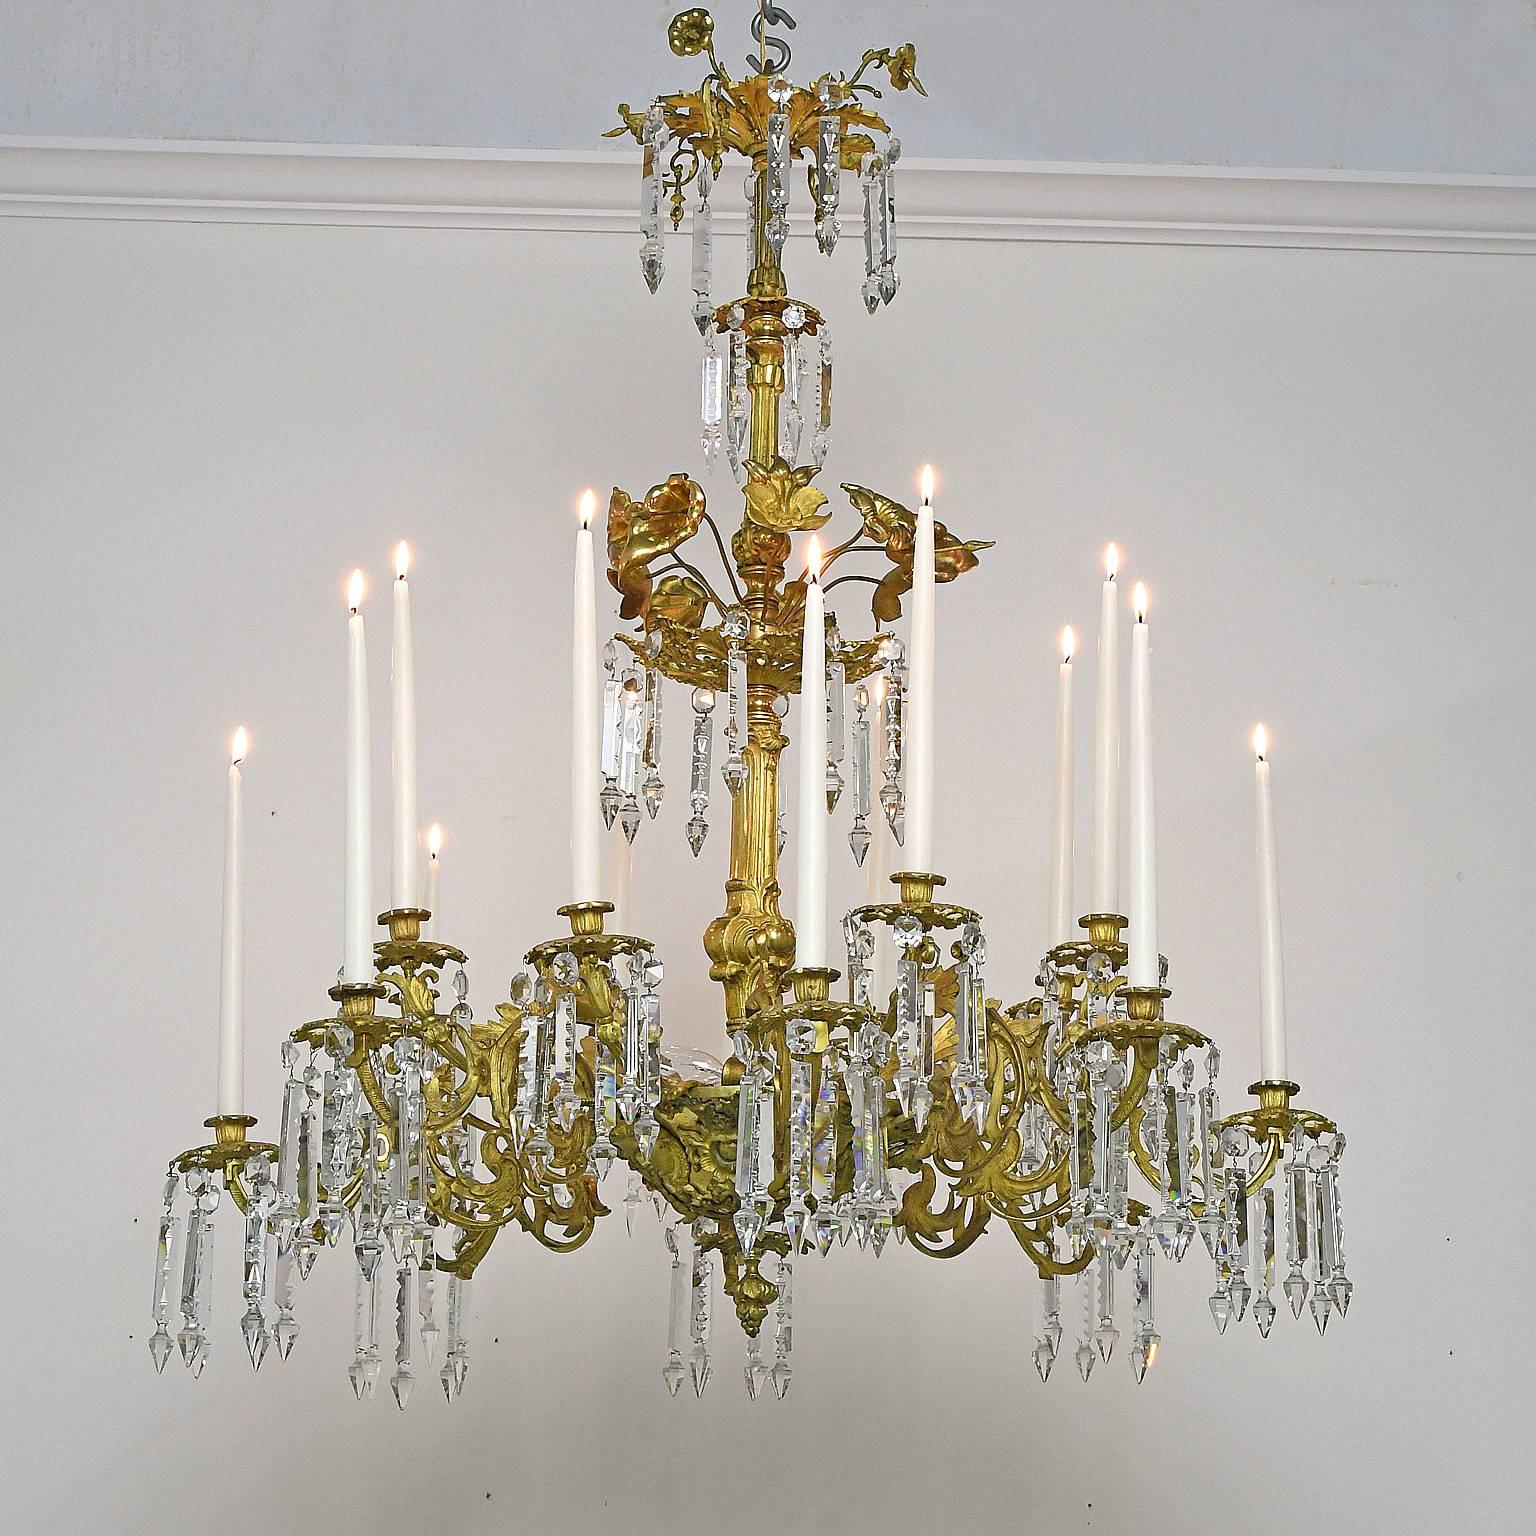 Belle Époque French Rococo Style Bronze Doré Chandelier with 16 Candles & 6 lights, ca 1840